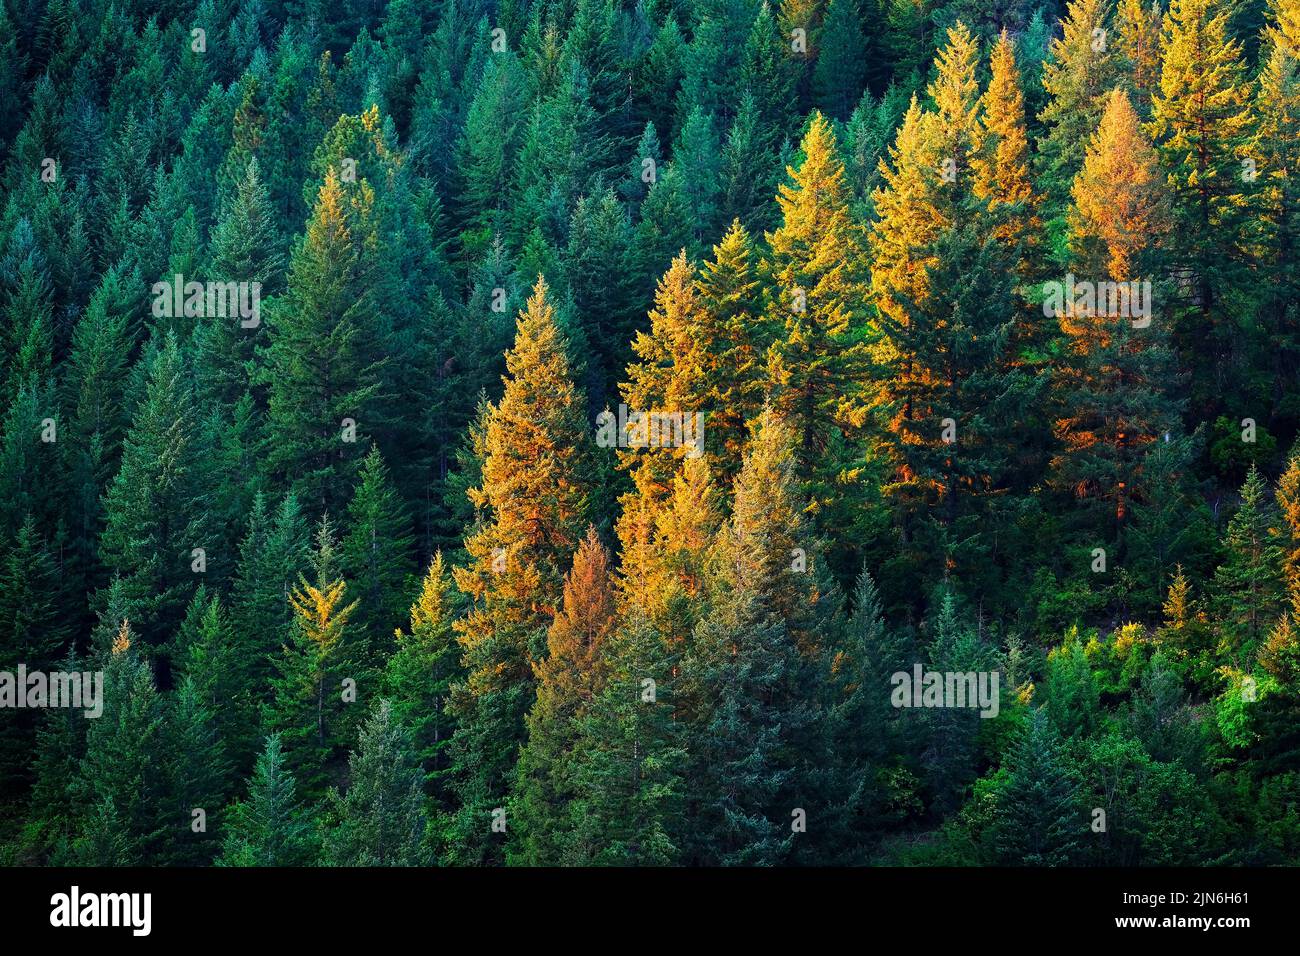 Lush pine tree forest in golden evening light Stock Photo